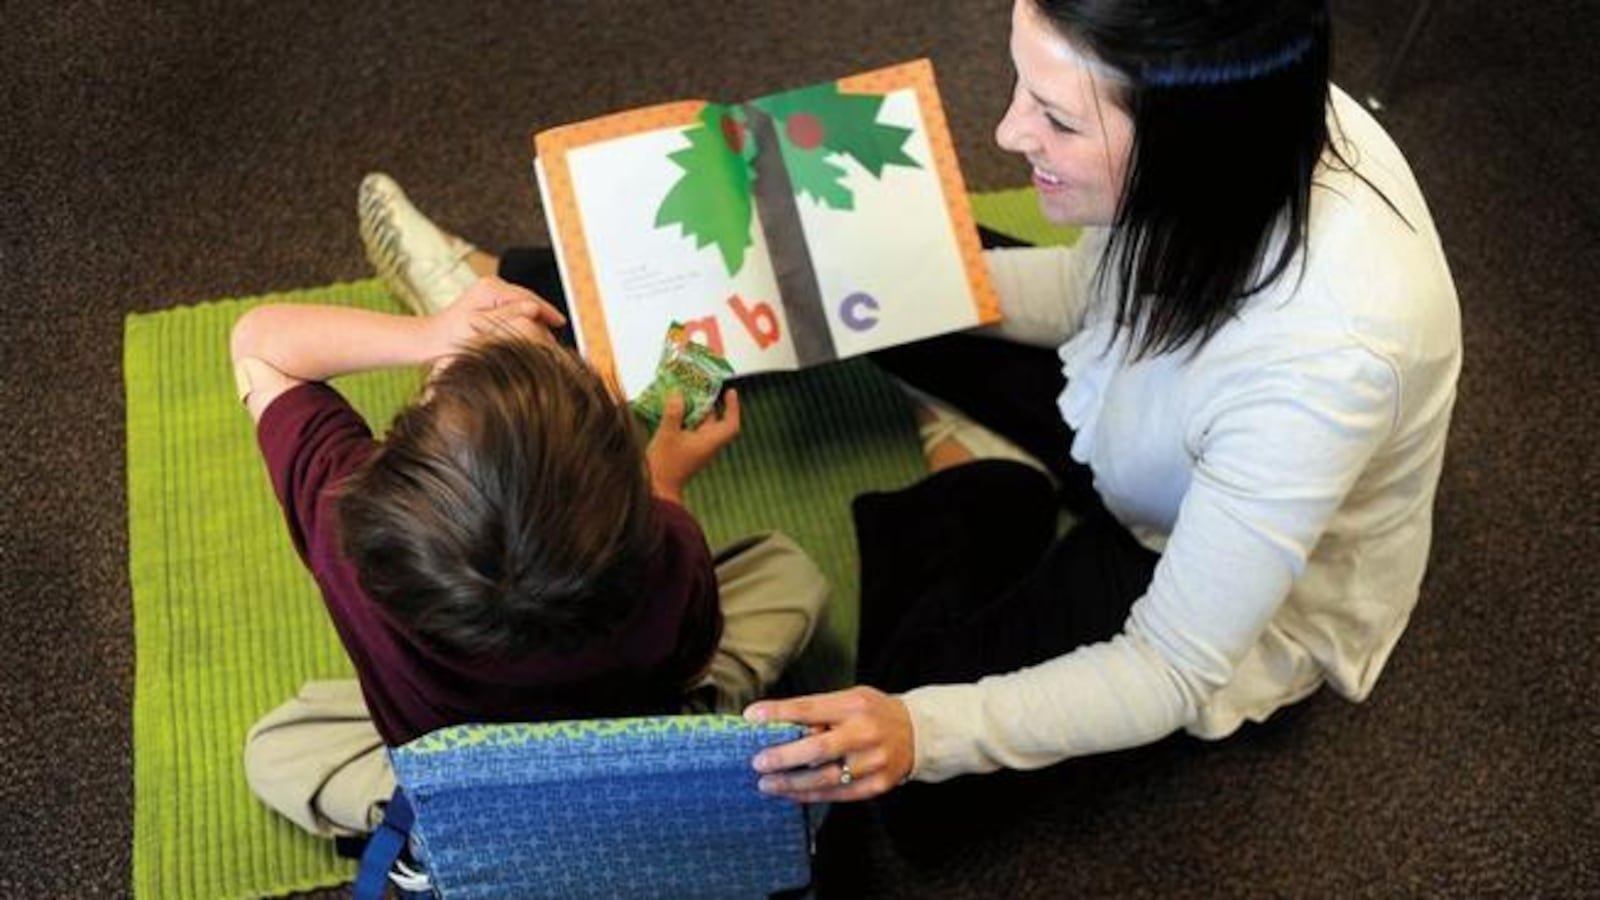 Kimberly Bertha, a special education teacher in Denver works with a student in 2010.